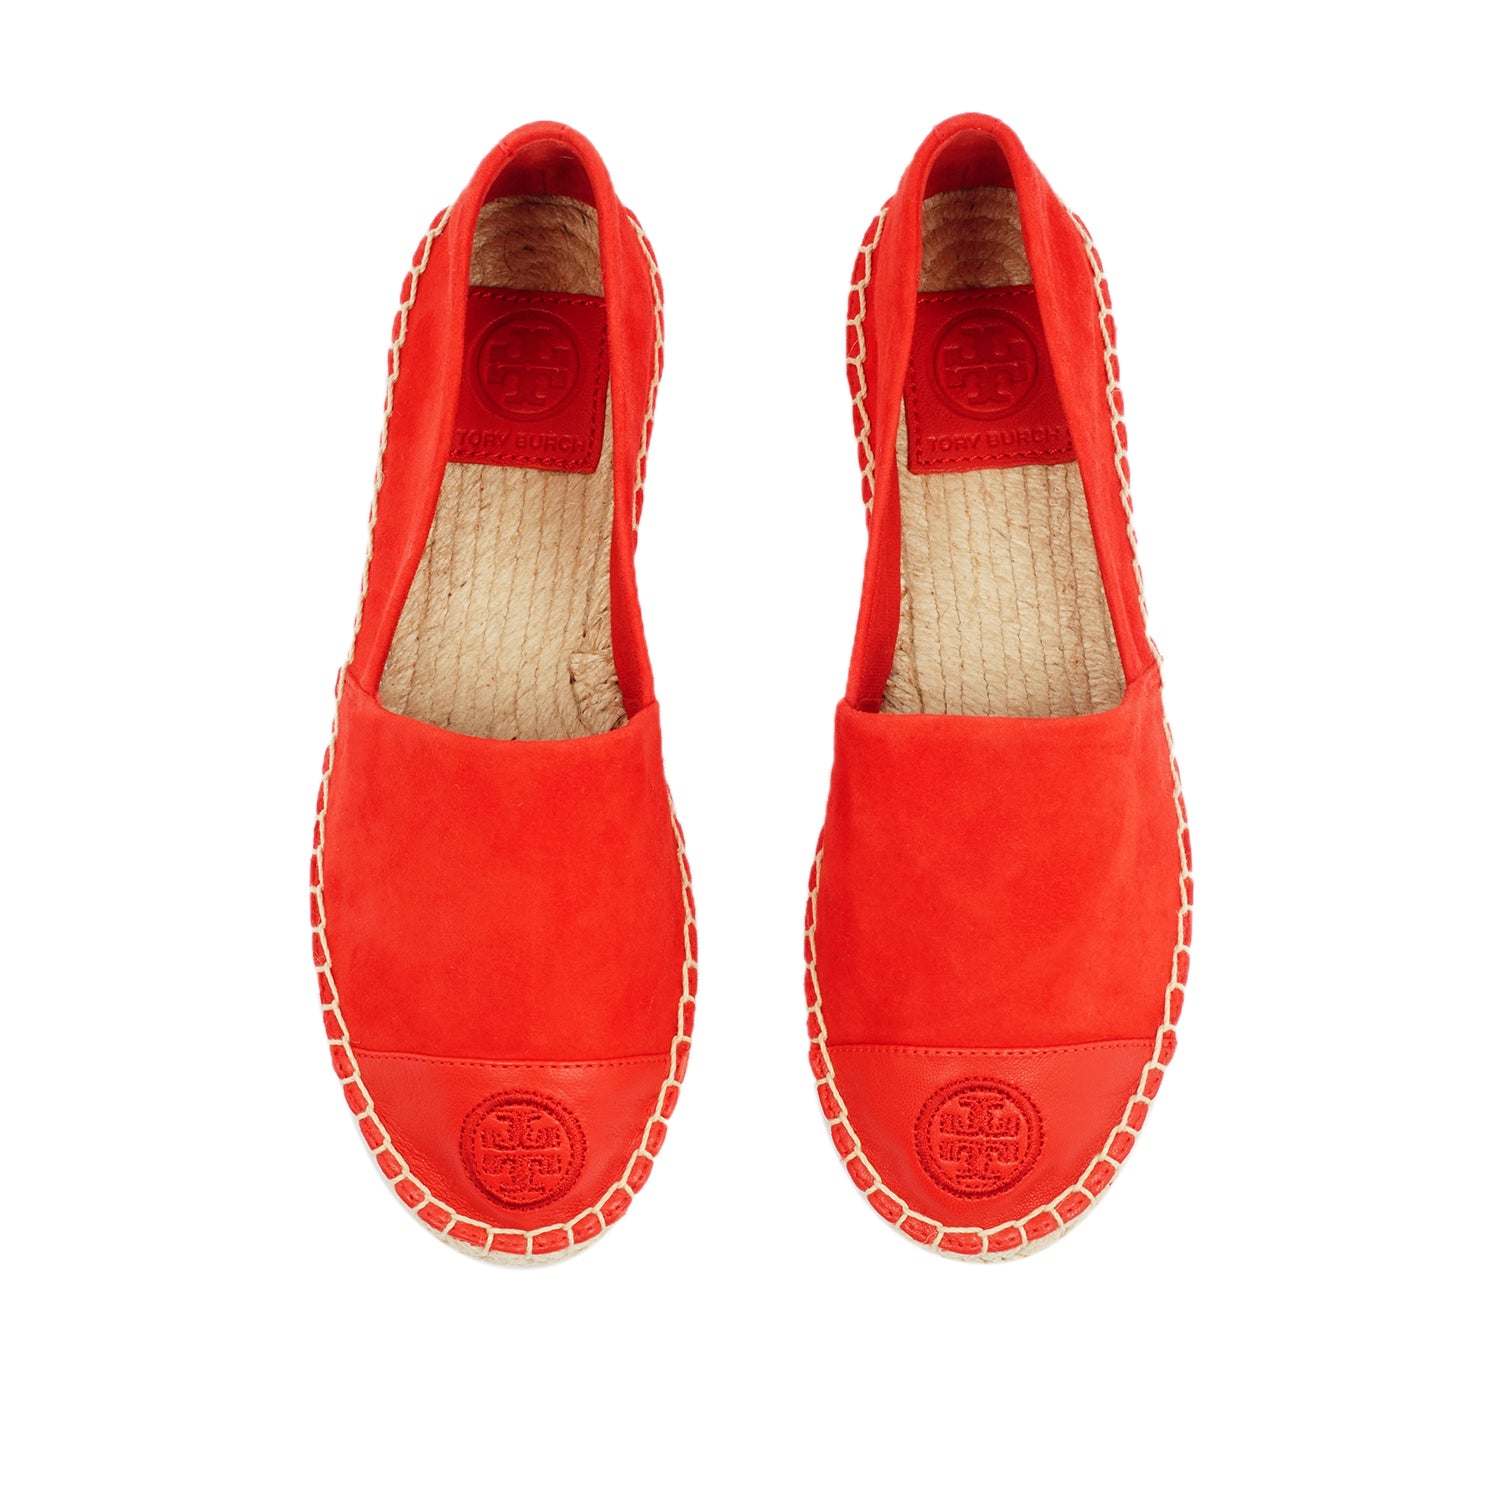 TORY BURCH COLOR BLOCK FLAT ESPADRILLE IN RED